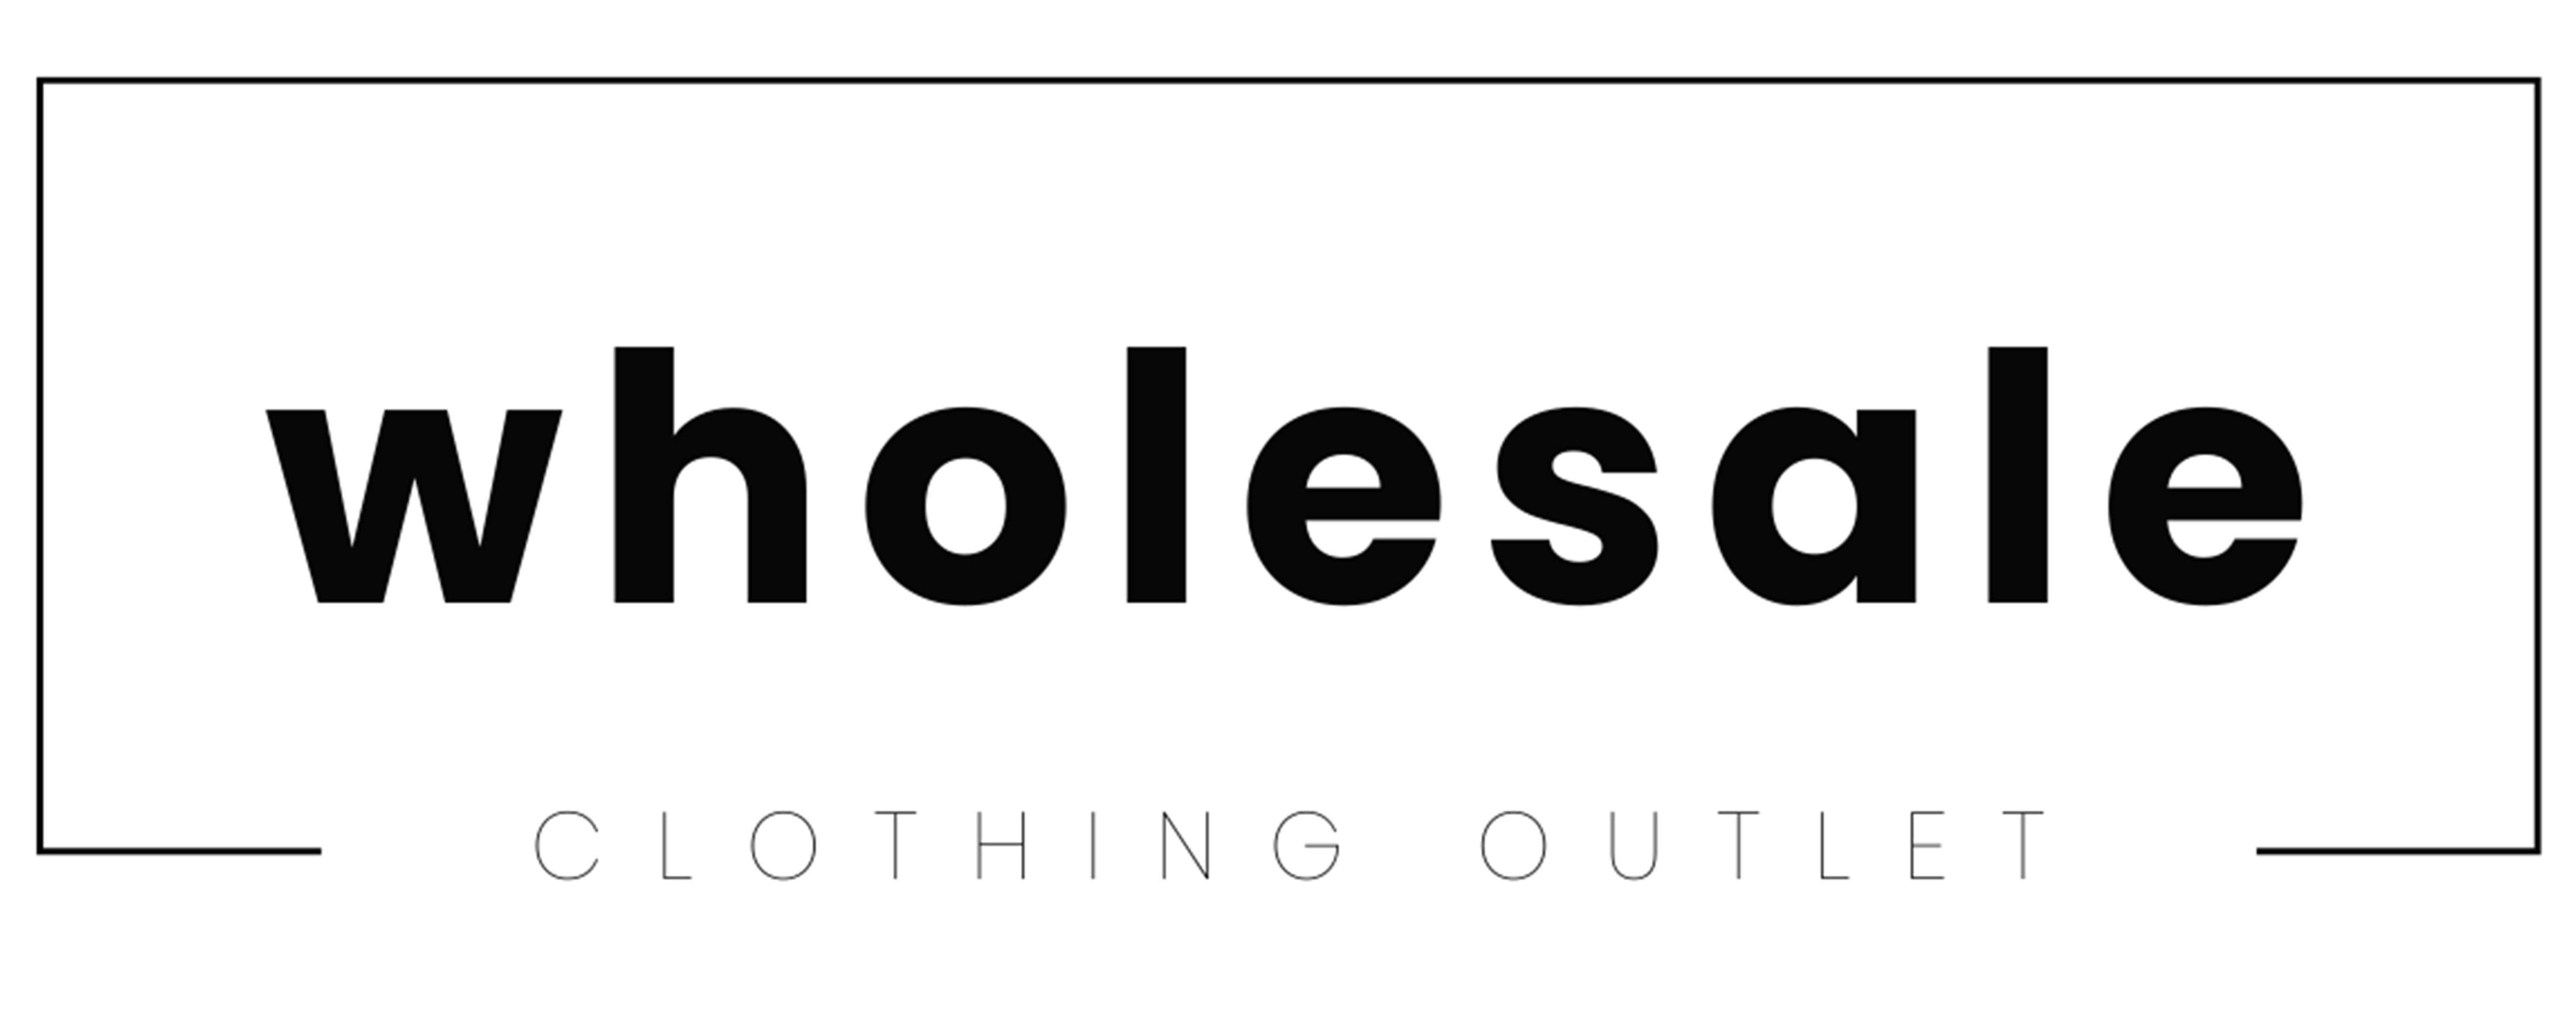 Wholesale Clothing Outlet